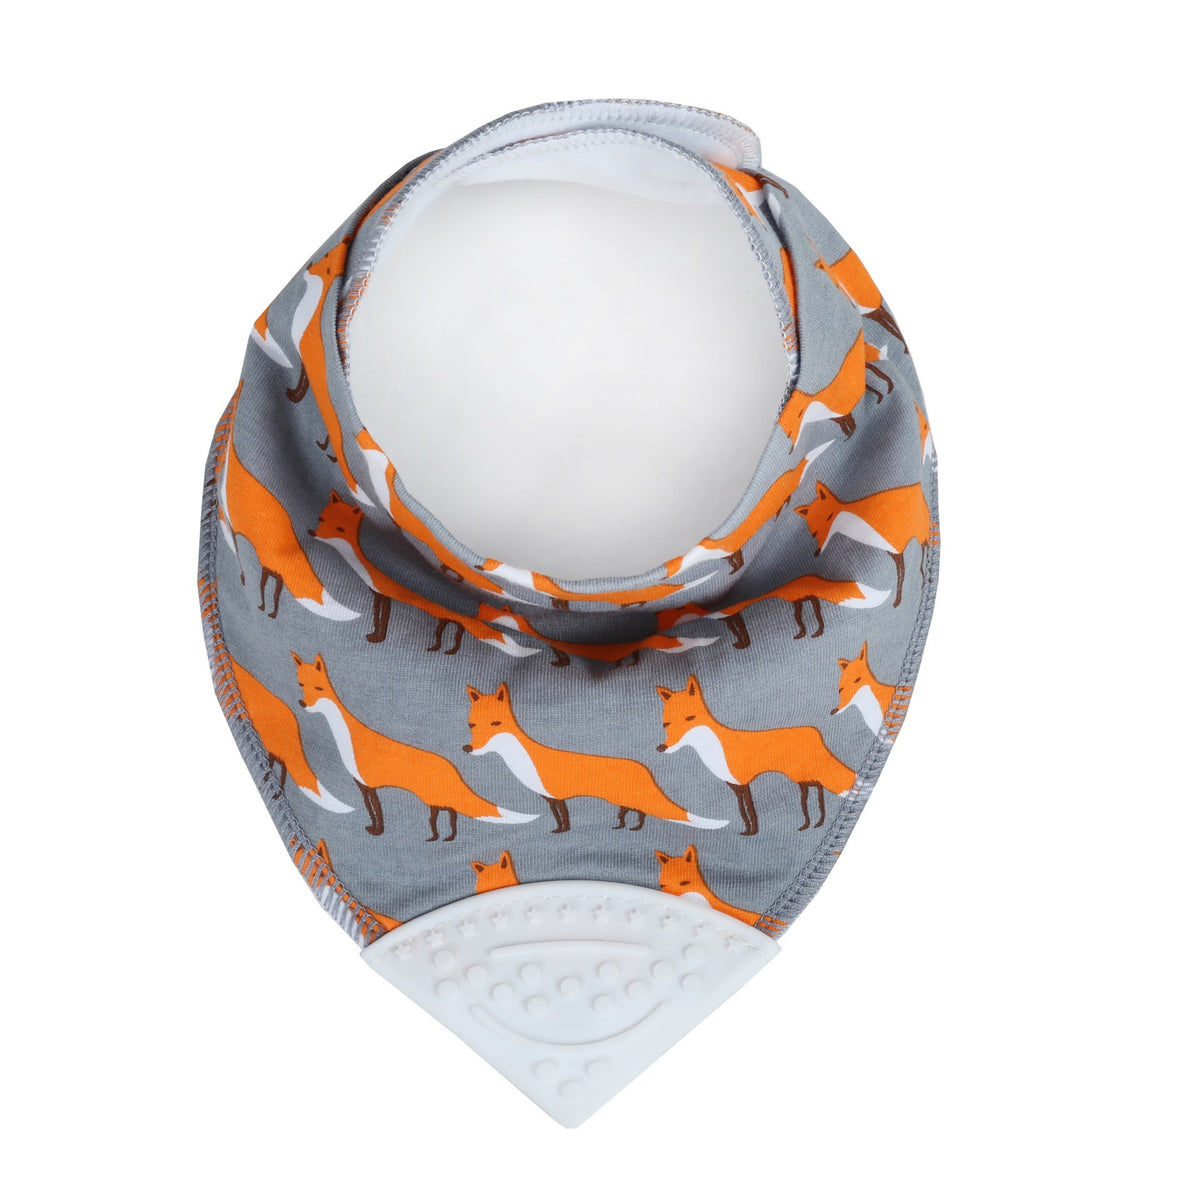 Baby Bandana Drool Bib with attached Chewable Teether A32121B